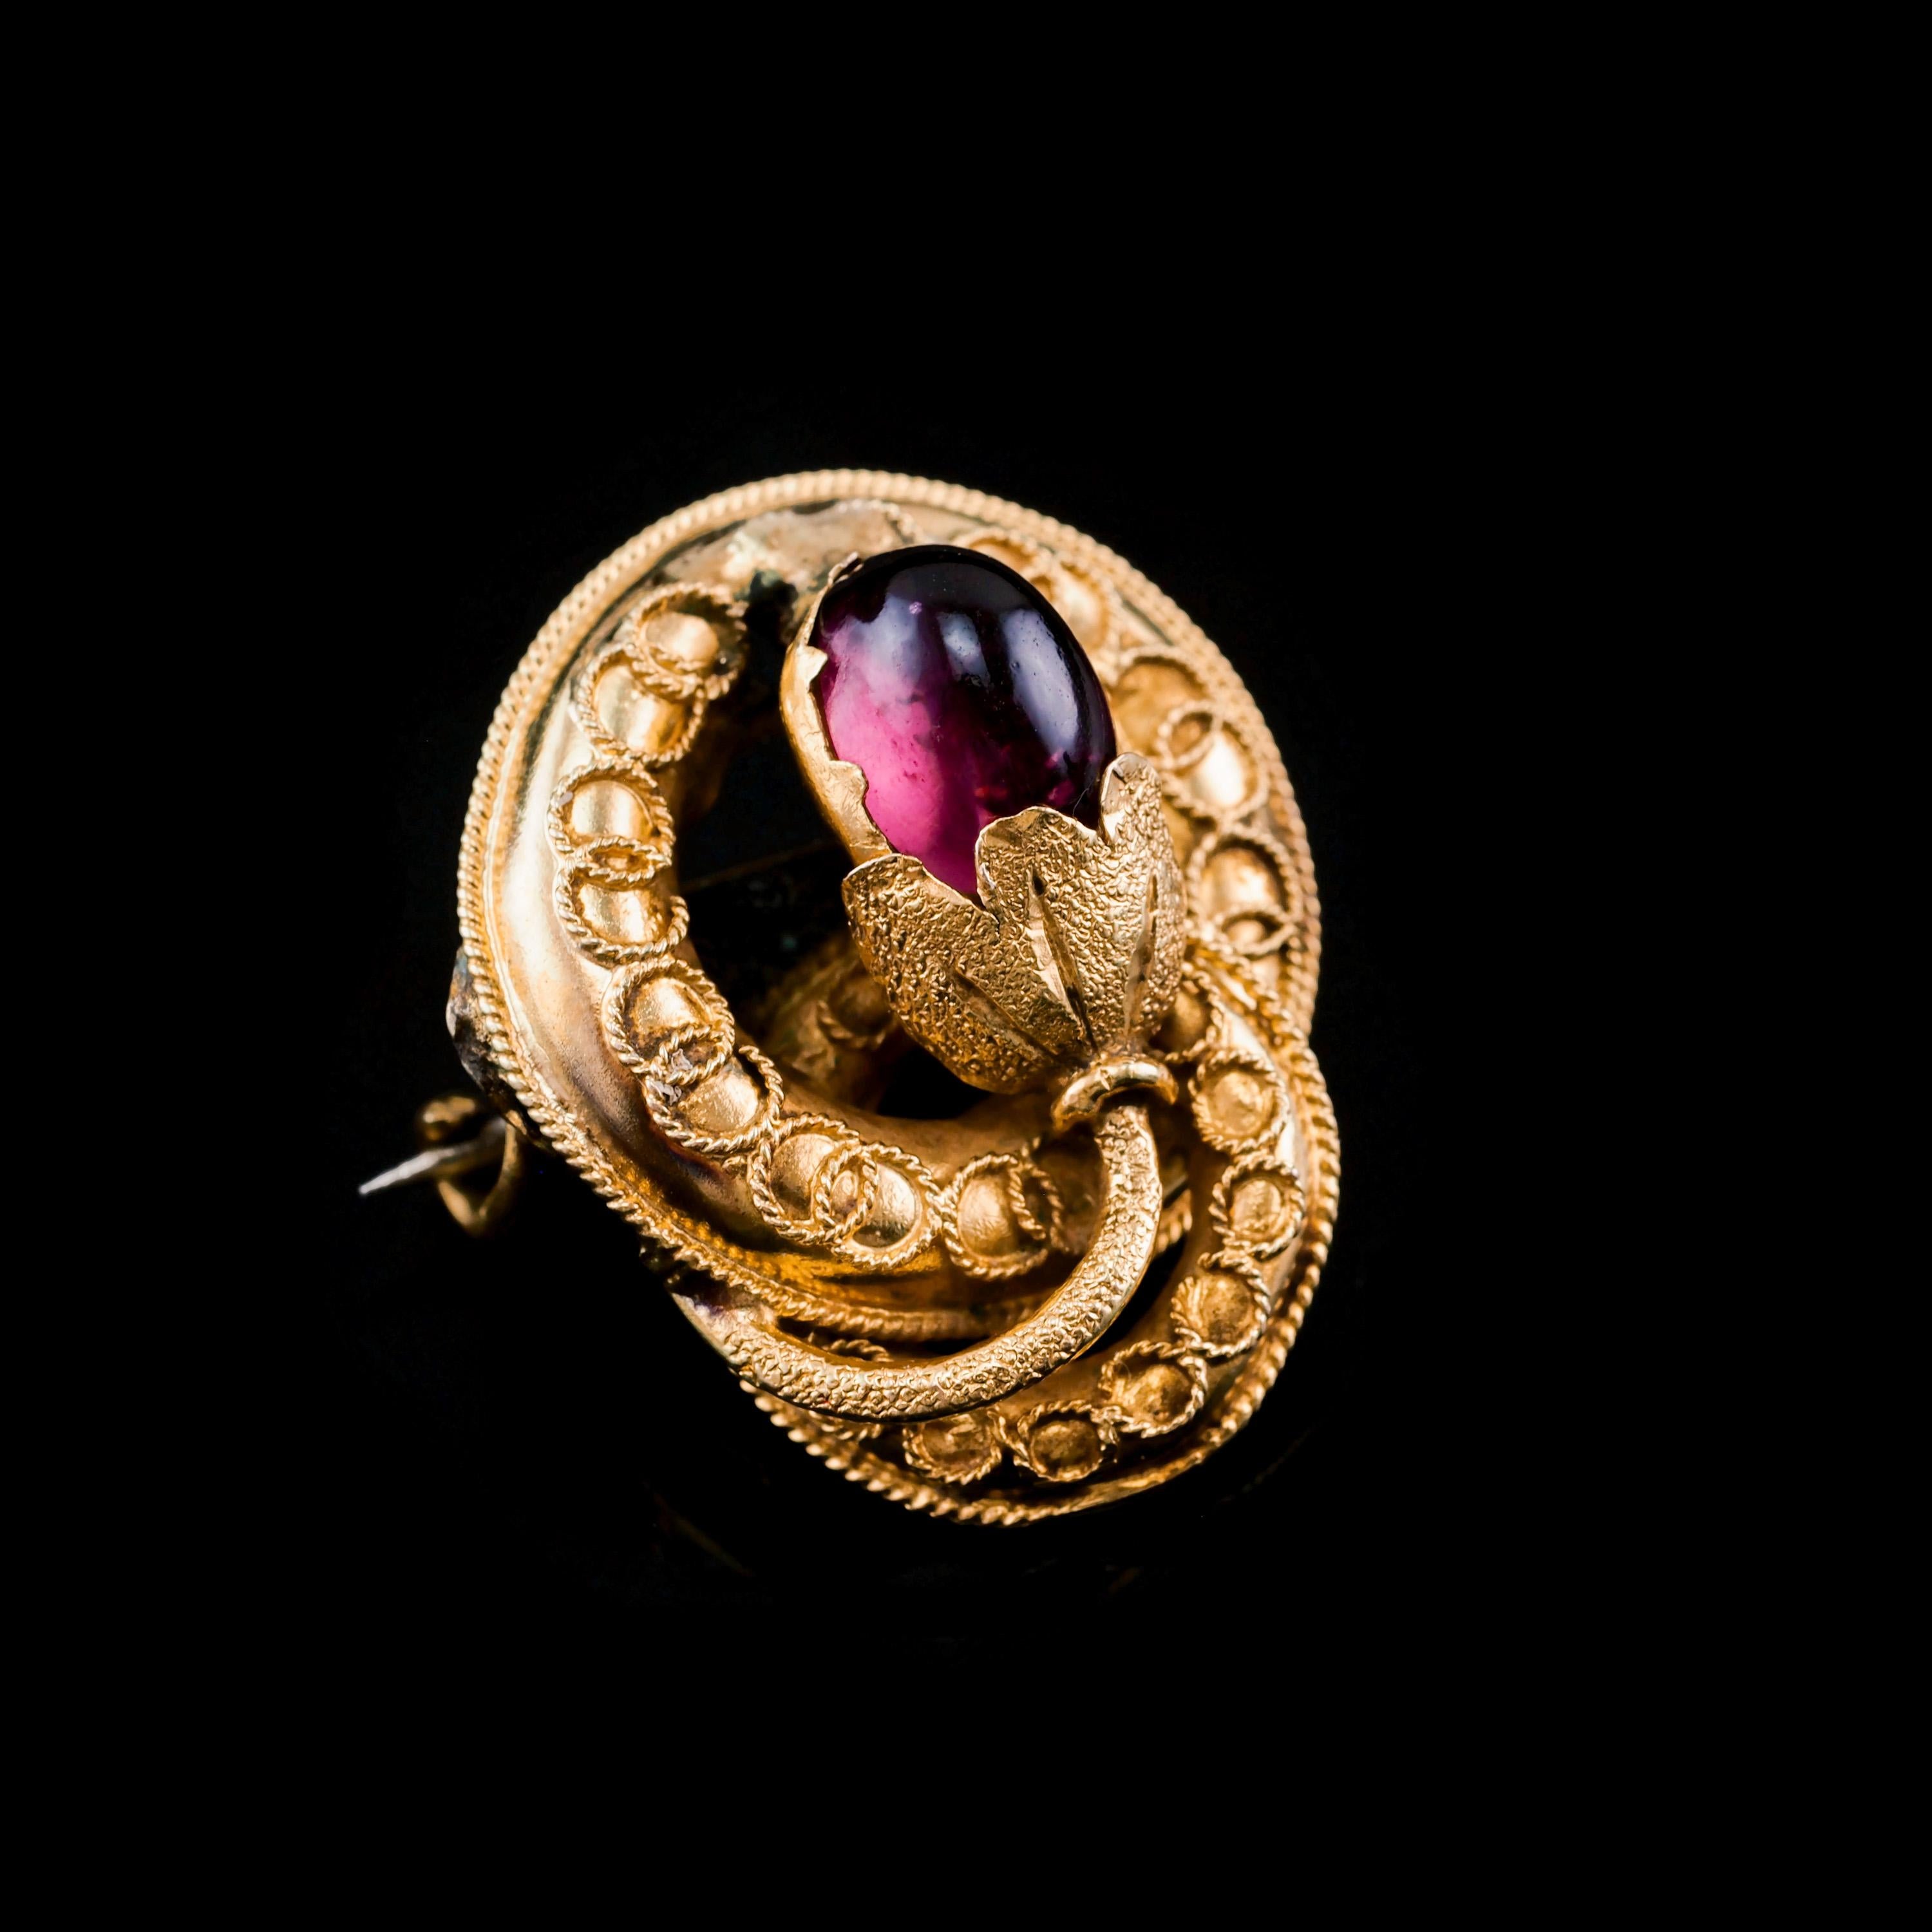 We are delighted to offer this sweet 18ct gold Victorian brooch made c.1880.
  
This brooch features a lovely intertwined circular design with the central flower bud being mounted with a garnet cabochon. 
 
The gold workmanship on this brooch is